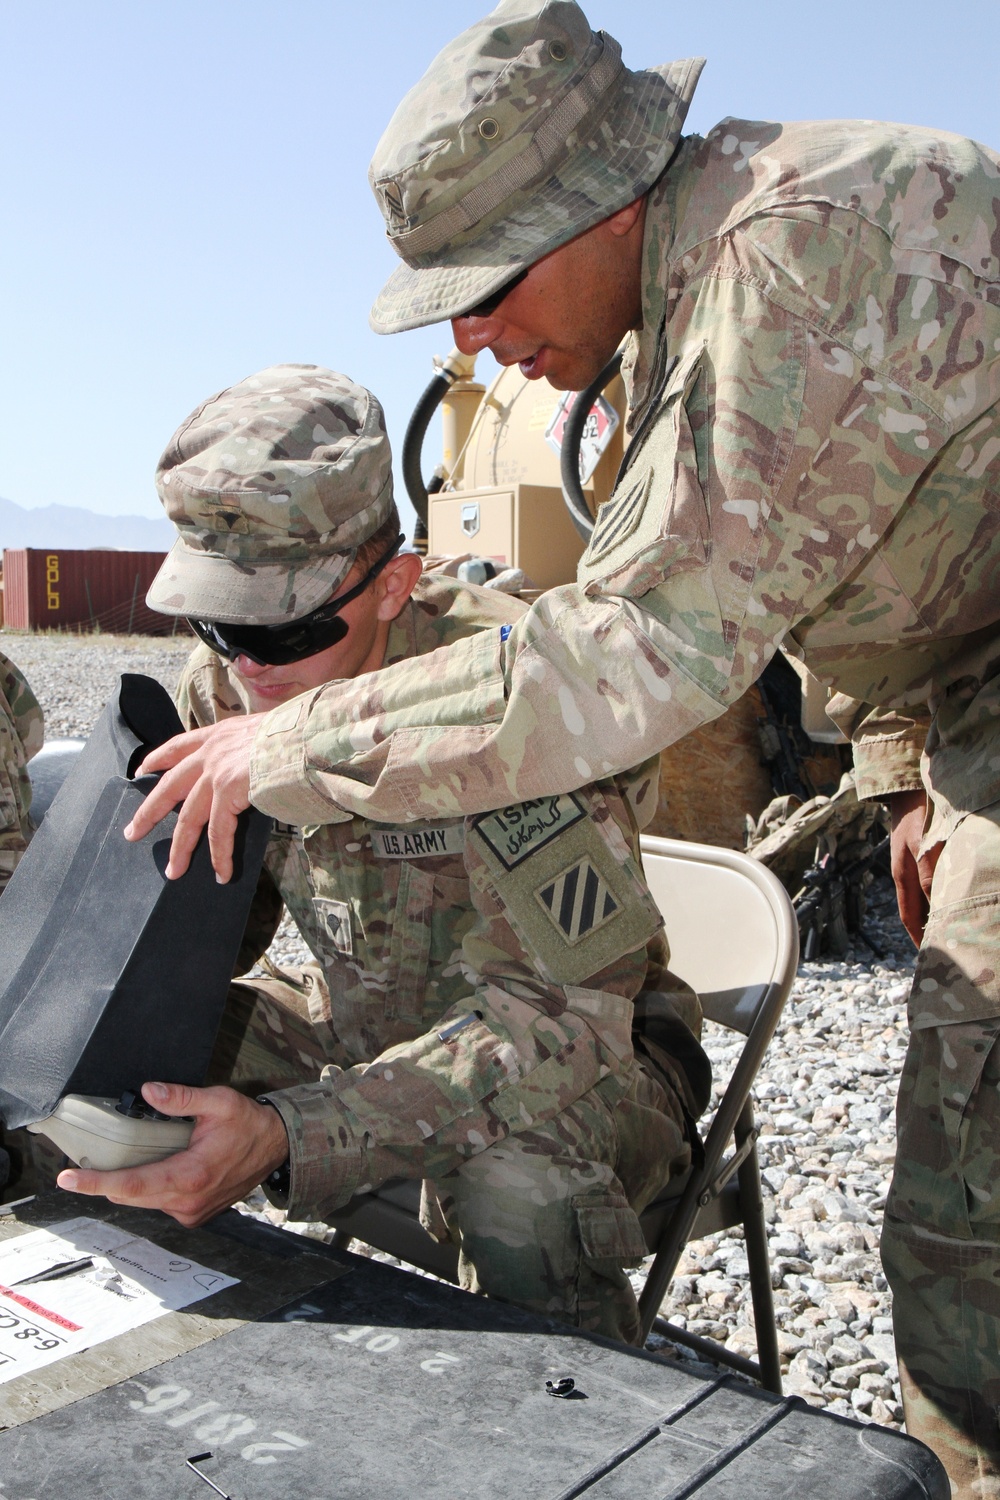 3rd ID soldiers certify on Raven unmanned aircraft